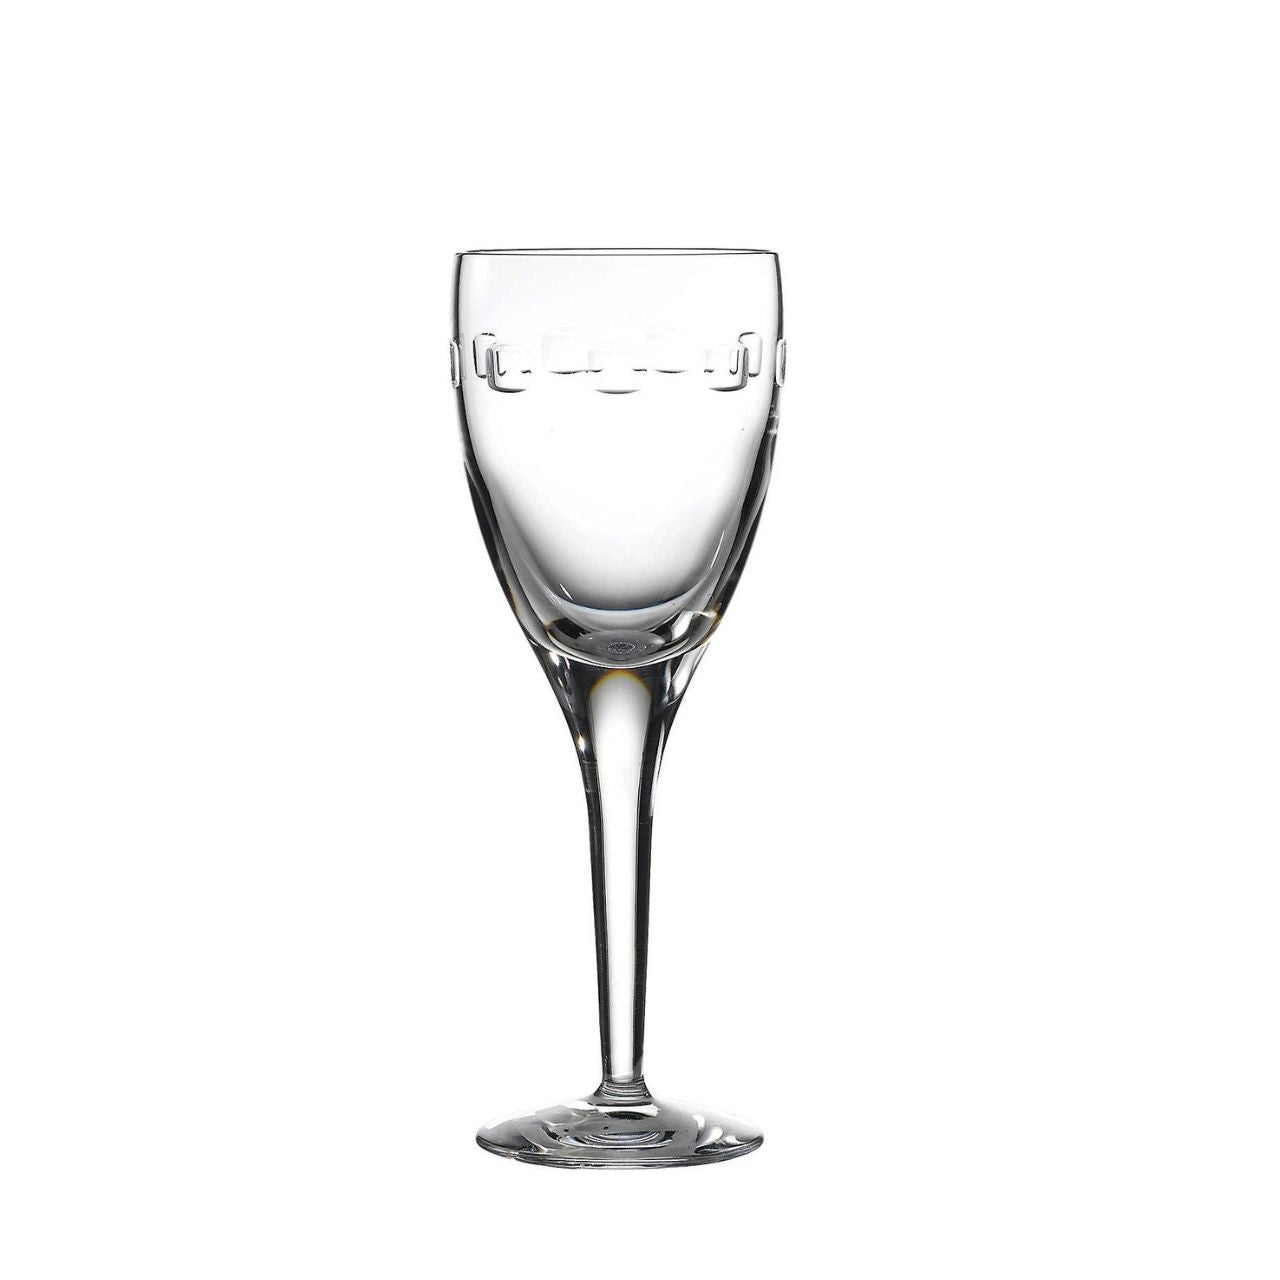 Waterford Crystal John Rocha Geo White Wine Glass Single  John Rocha Geo White Wine glass for Waterford. Featuring a dynamic geometric motif on brilliant crystal, John Rocha's Geo collection epitomises his design style, evoking simple elegance and a contemporary vision.